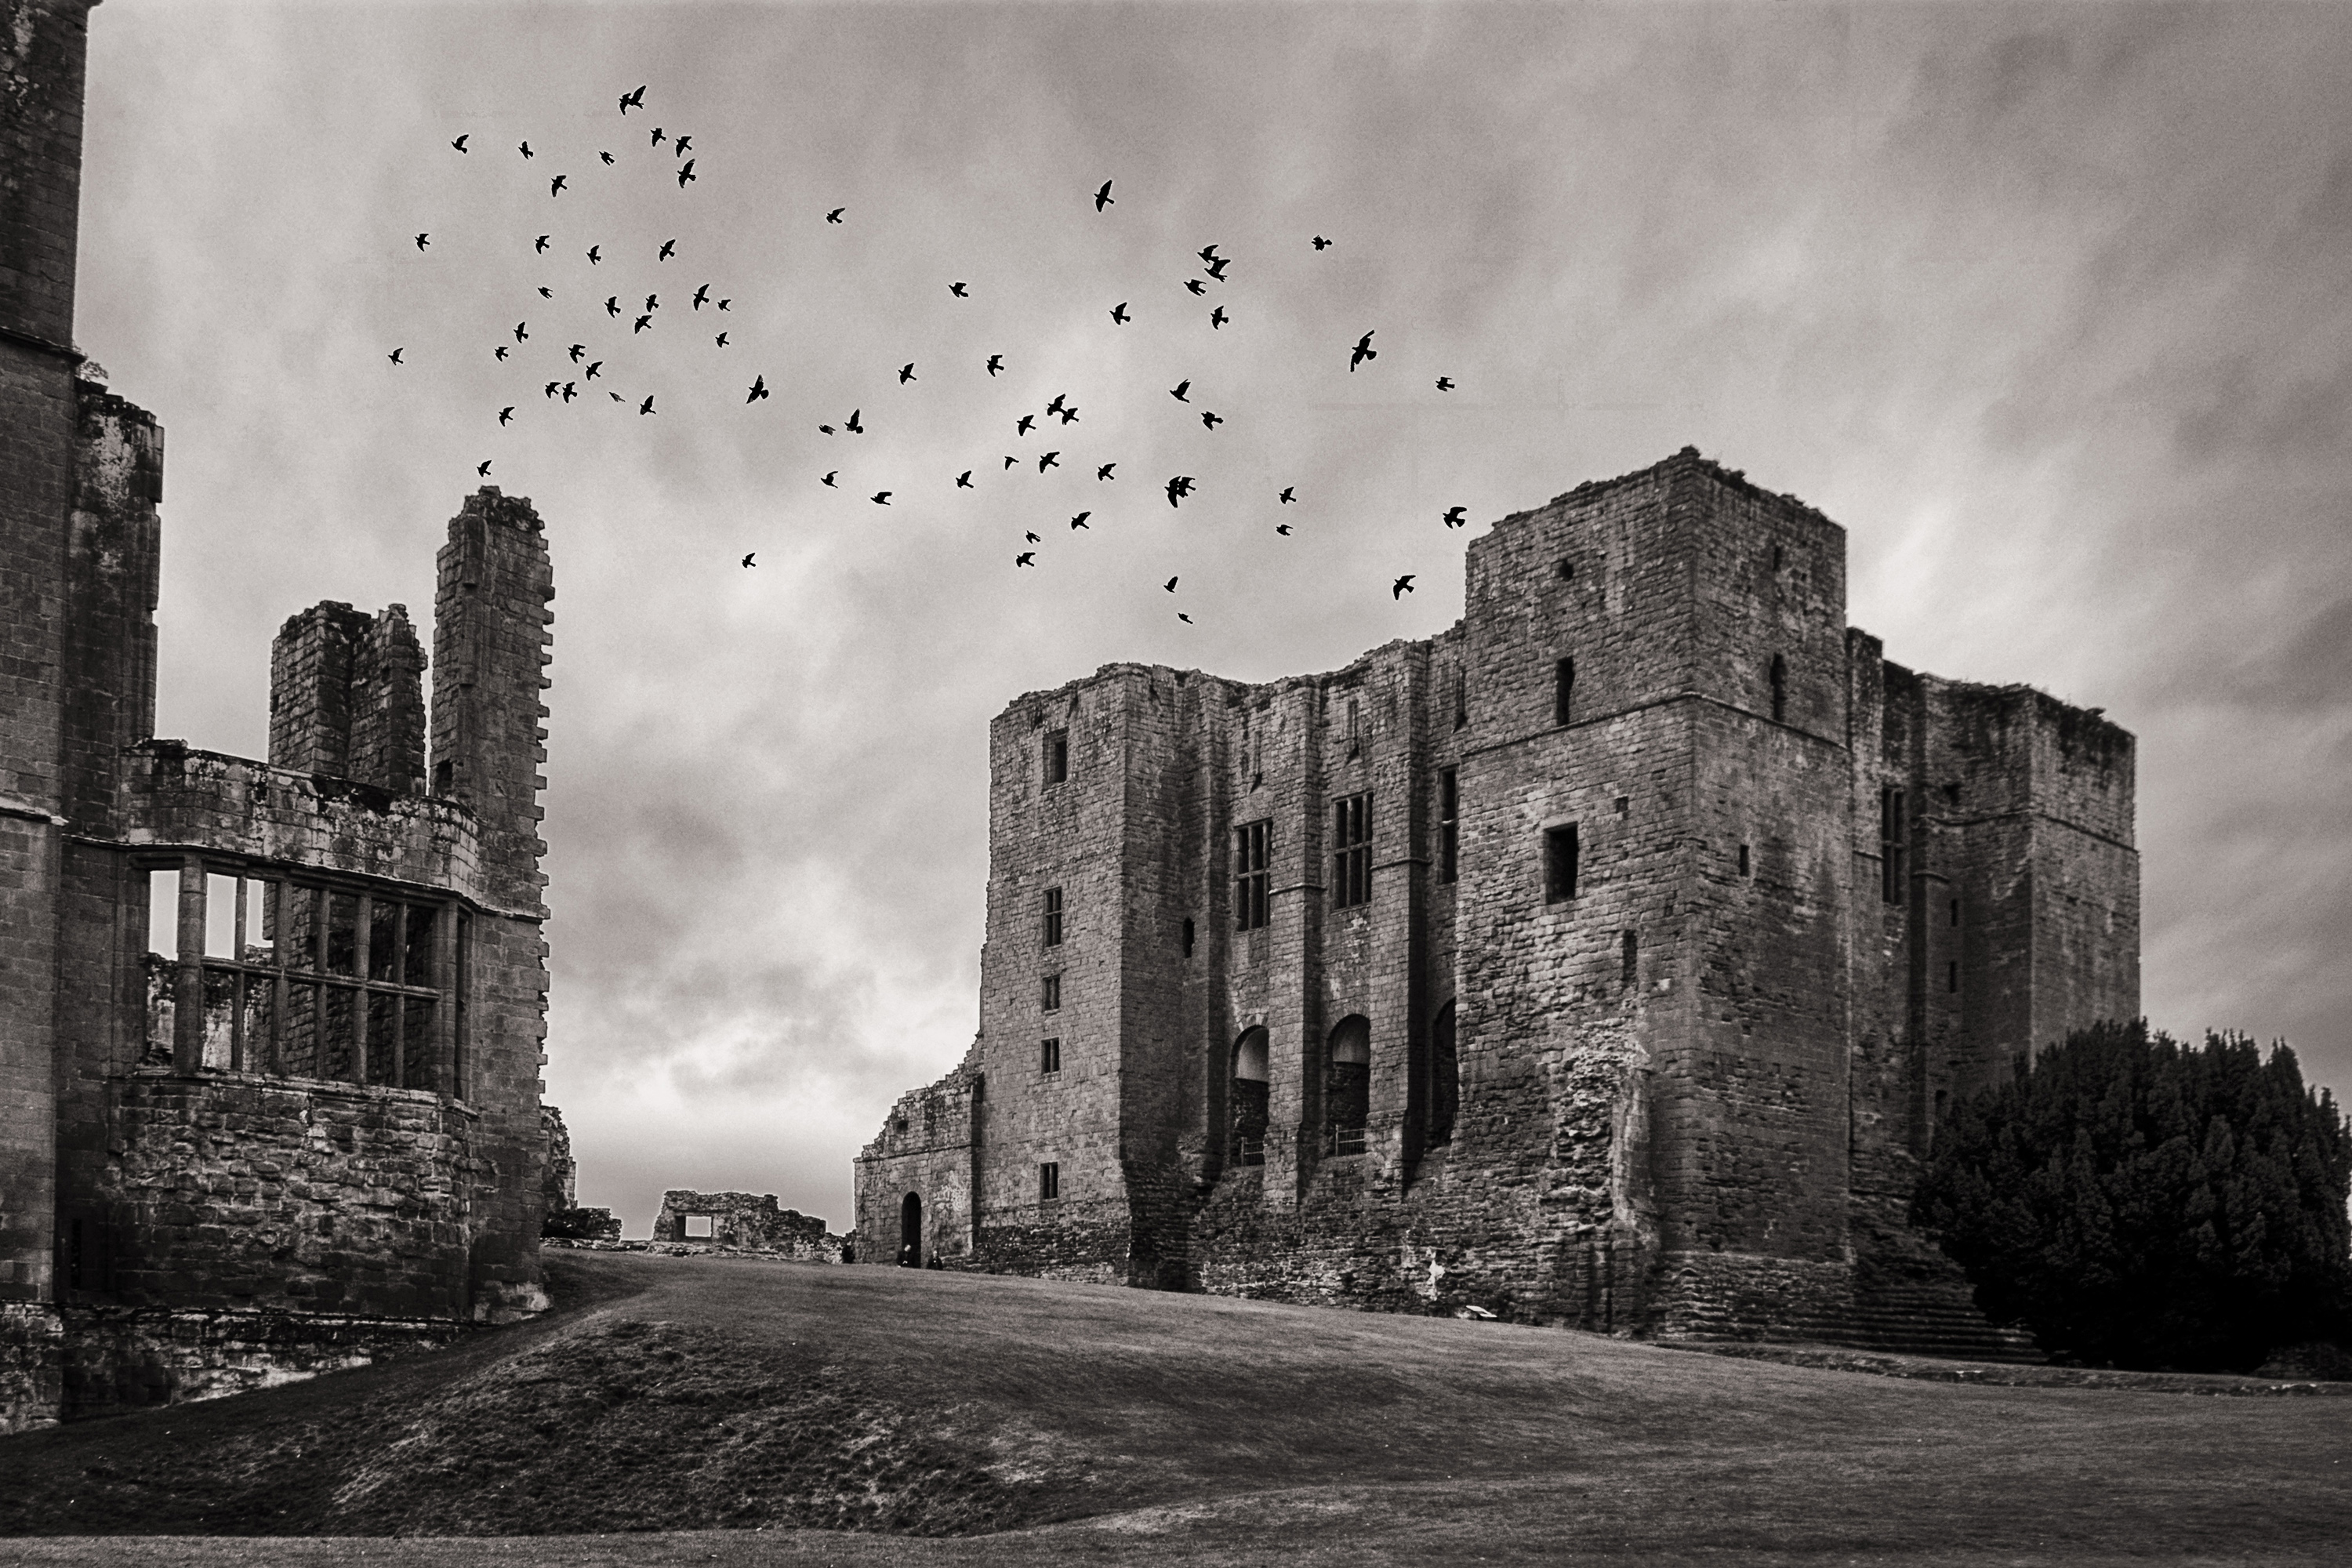 A black and white photo of the ancient Kenilworth Castle against a stormy sky filled with birds in flight evokes the gloomy aesthetic of early Gothic fiction.